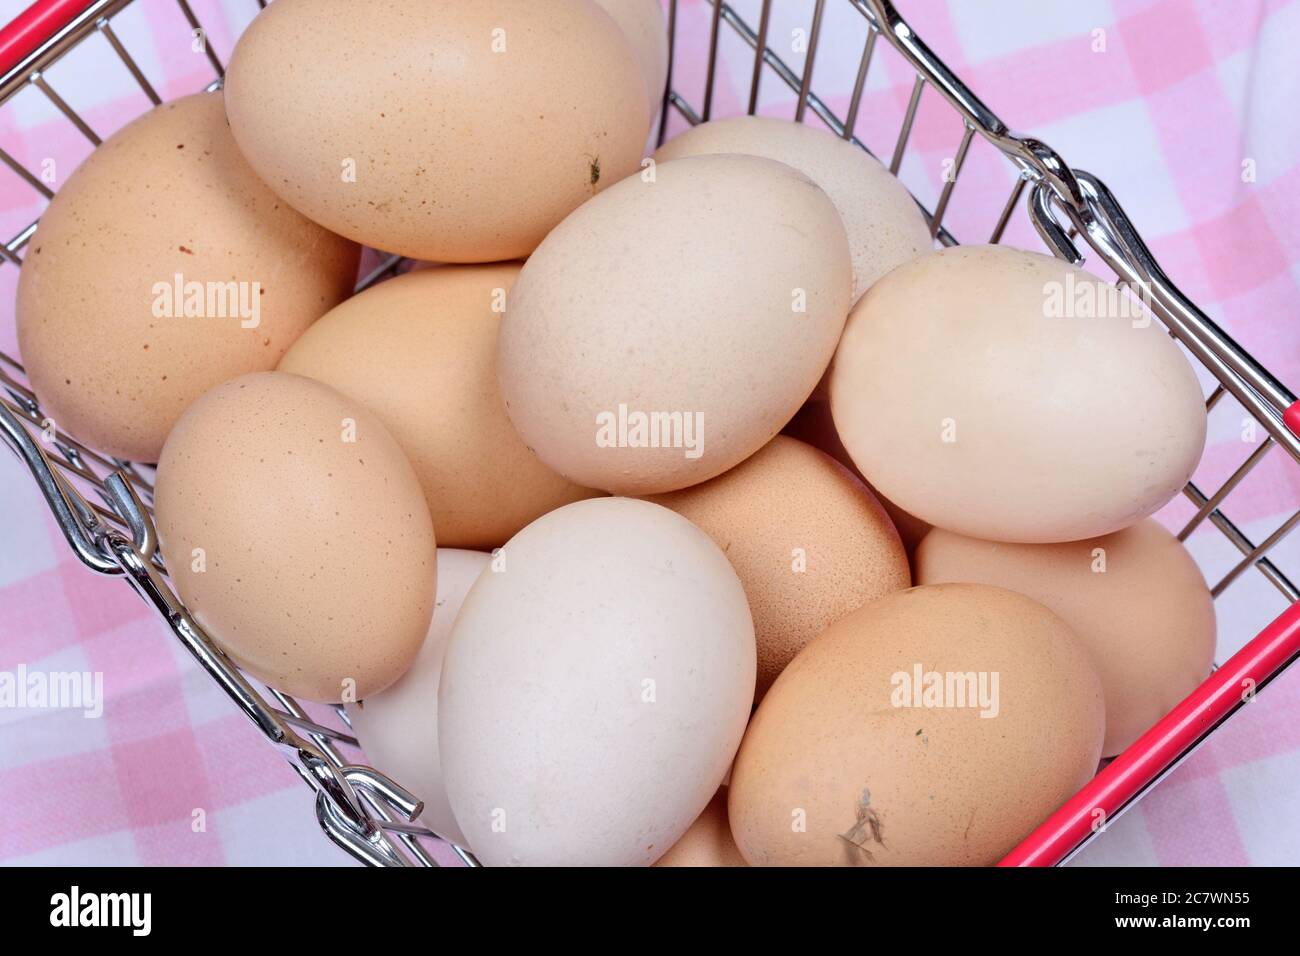 Eggs in a shopping cart on table Stock Photo